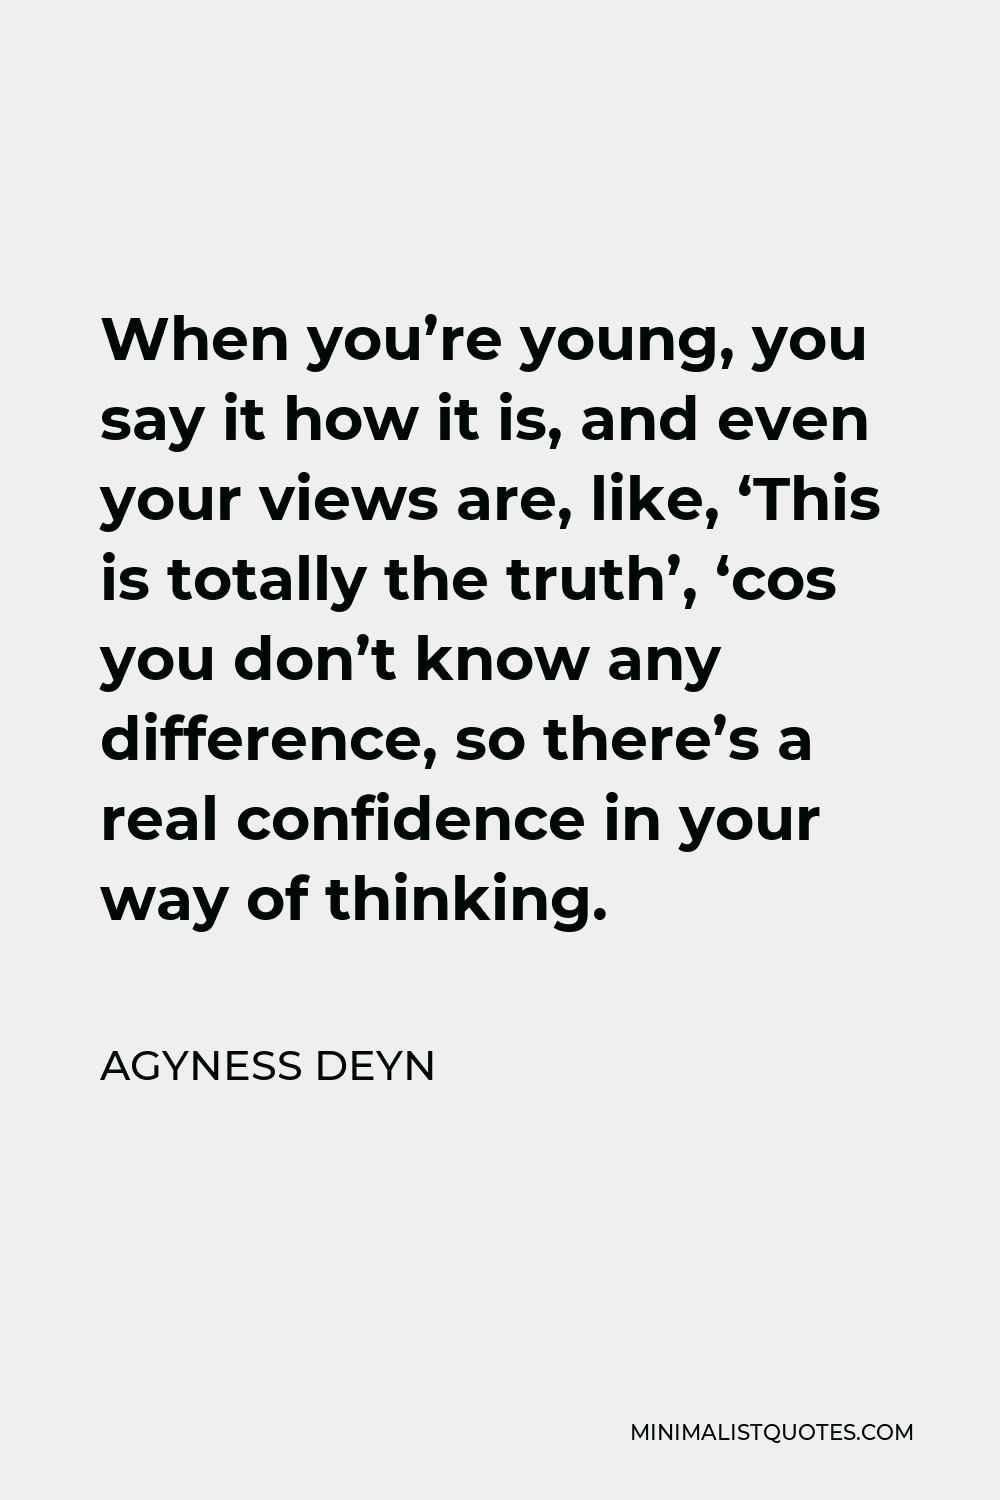 Agyness Deyn Quote - When you’re young, you say it how it is, and even your views are, like, ‘This is totally the truth’, ‘cos you don’t know any difference, so there’s a real confidence in your way of thinking.